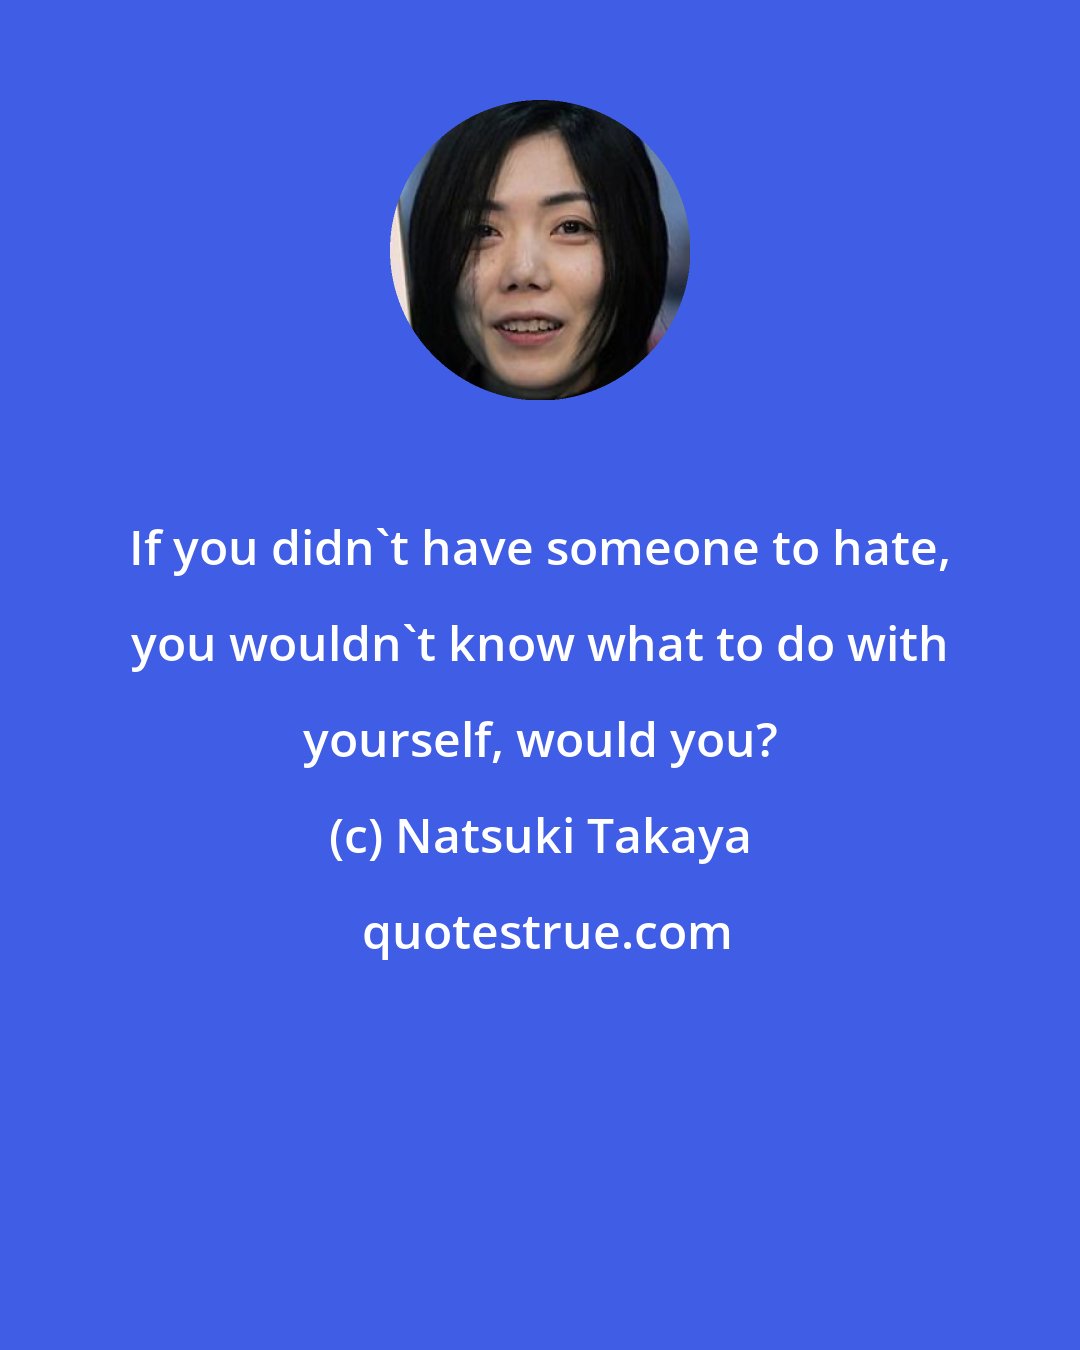 Natsuki Takaya: If you didn't have someone to hate, you wouldn't know what to do with yourself, would you?